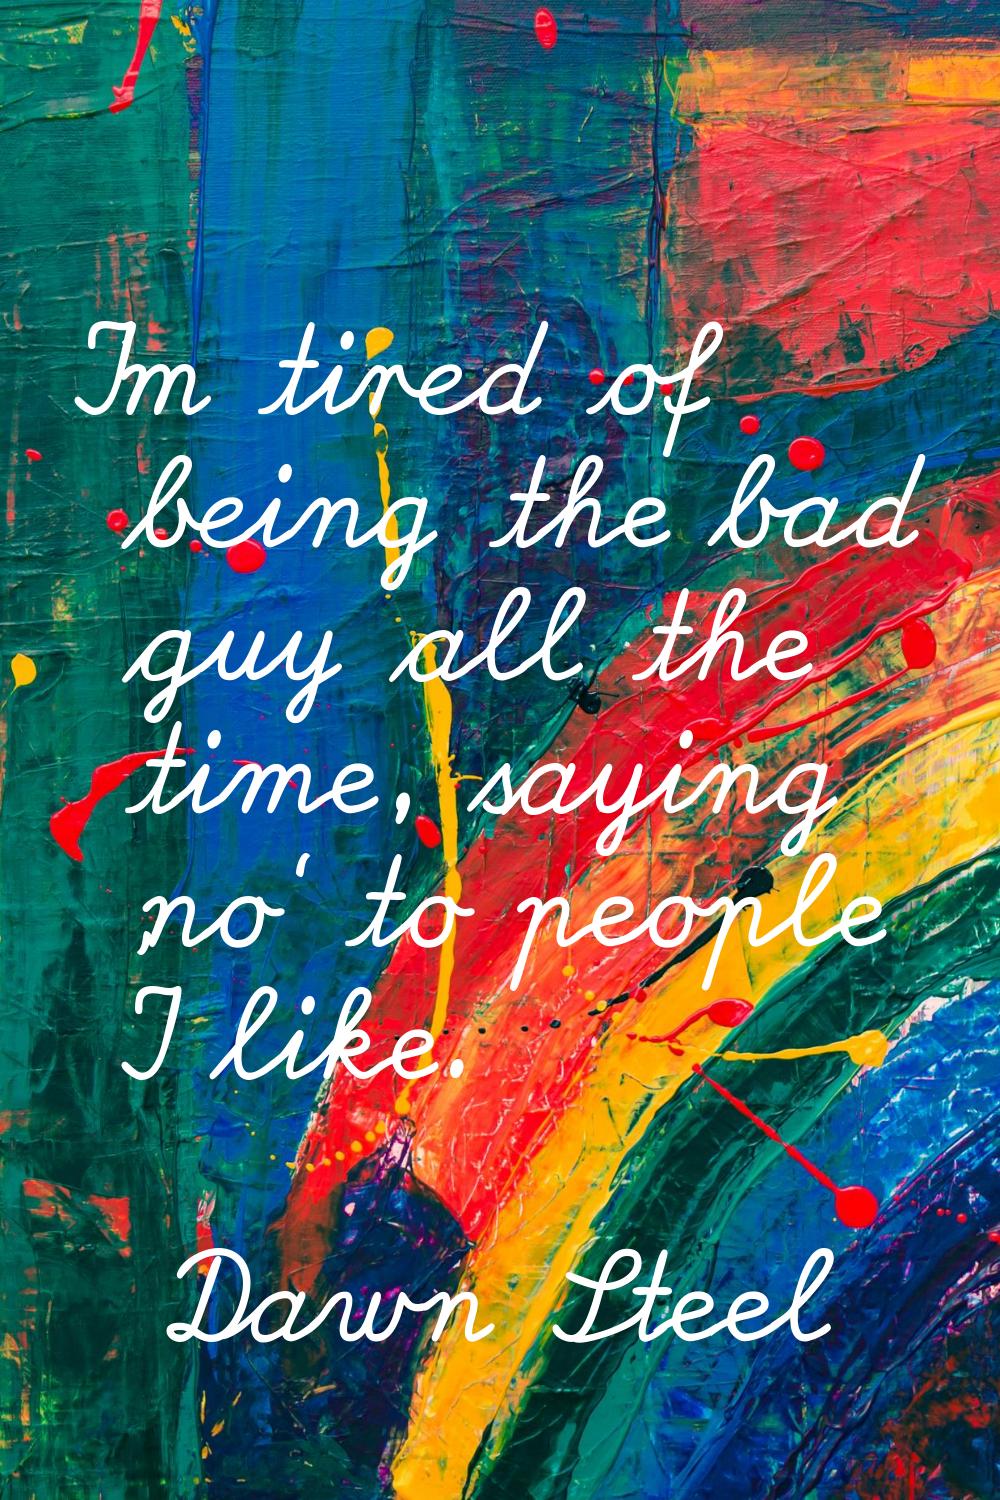 I'm tired of being the bad guy all the time, saying 'no' to people I like.